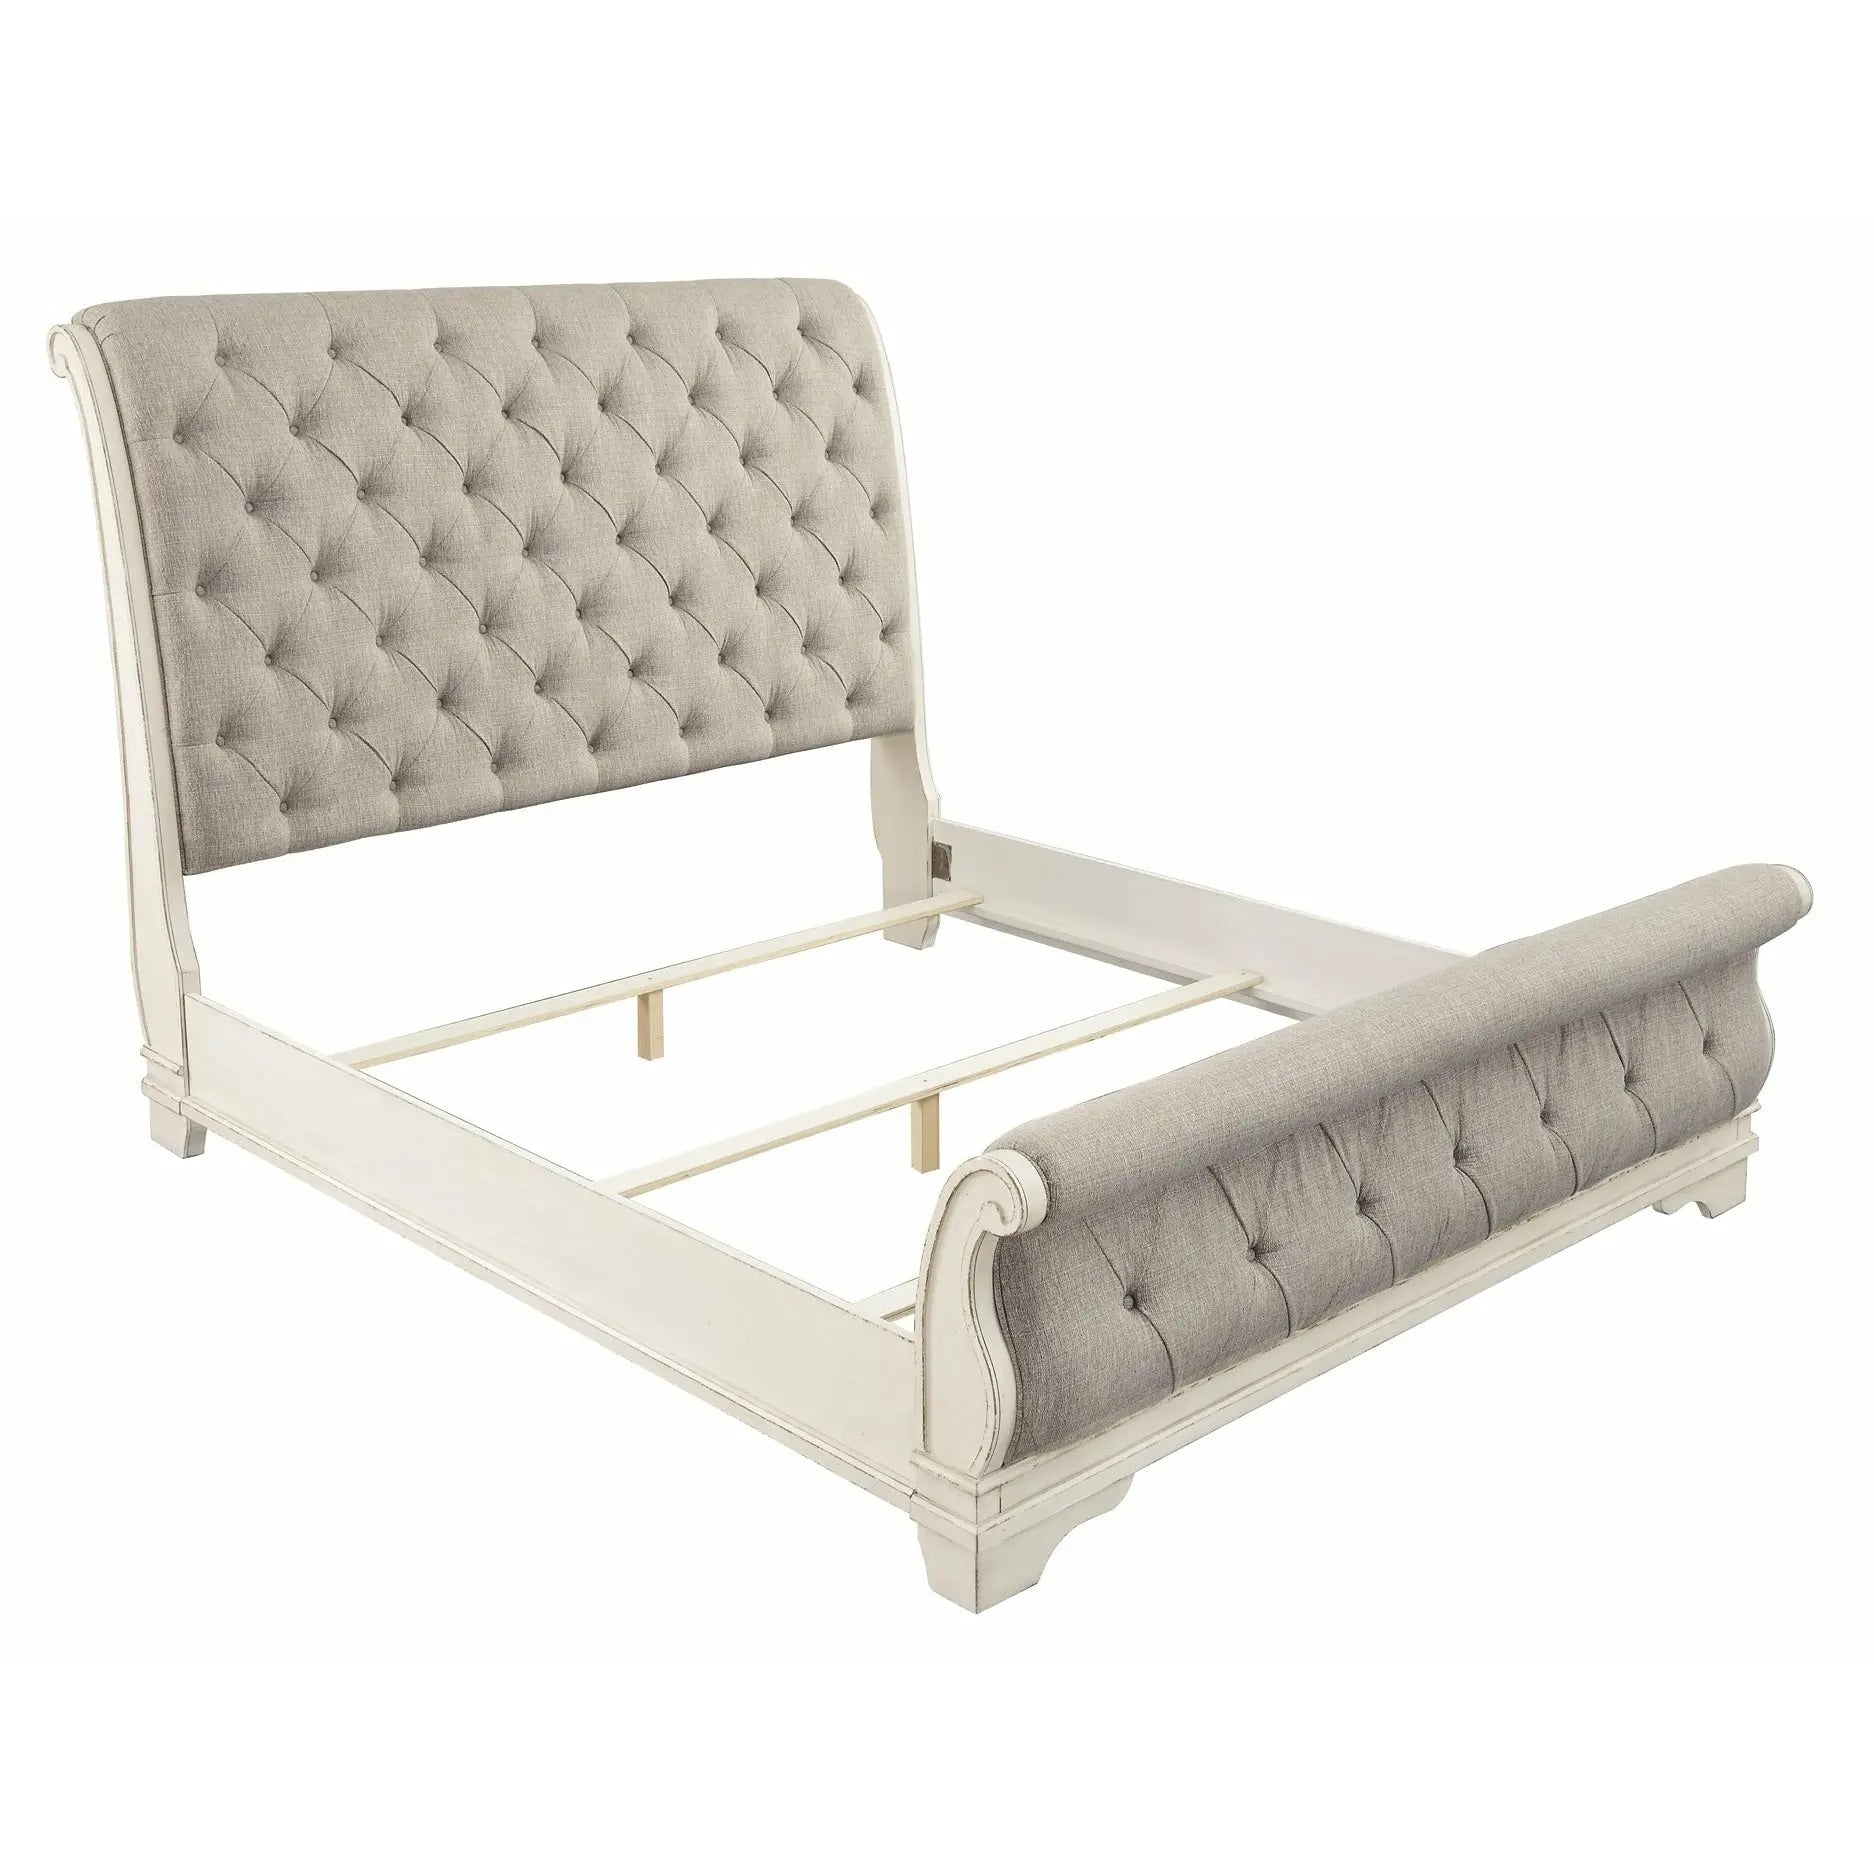 Realyn Package - Aus King Sleigh Bed BED